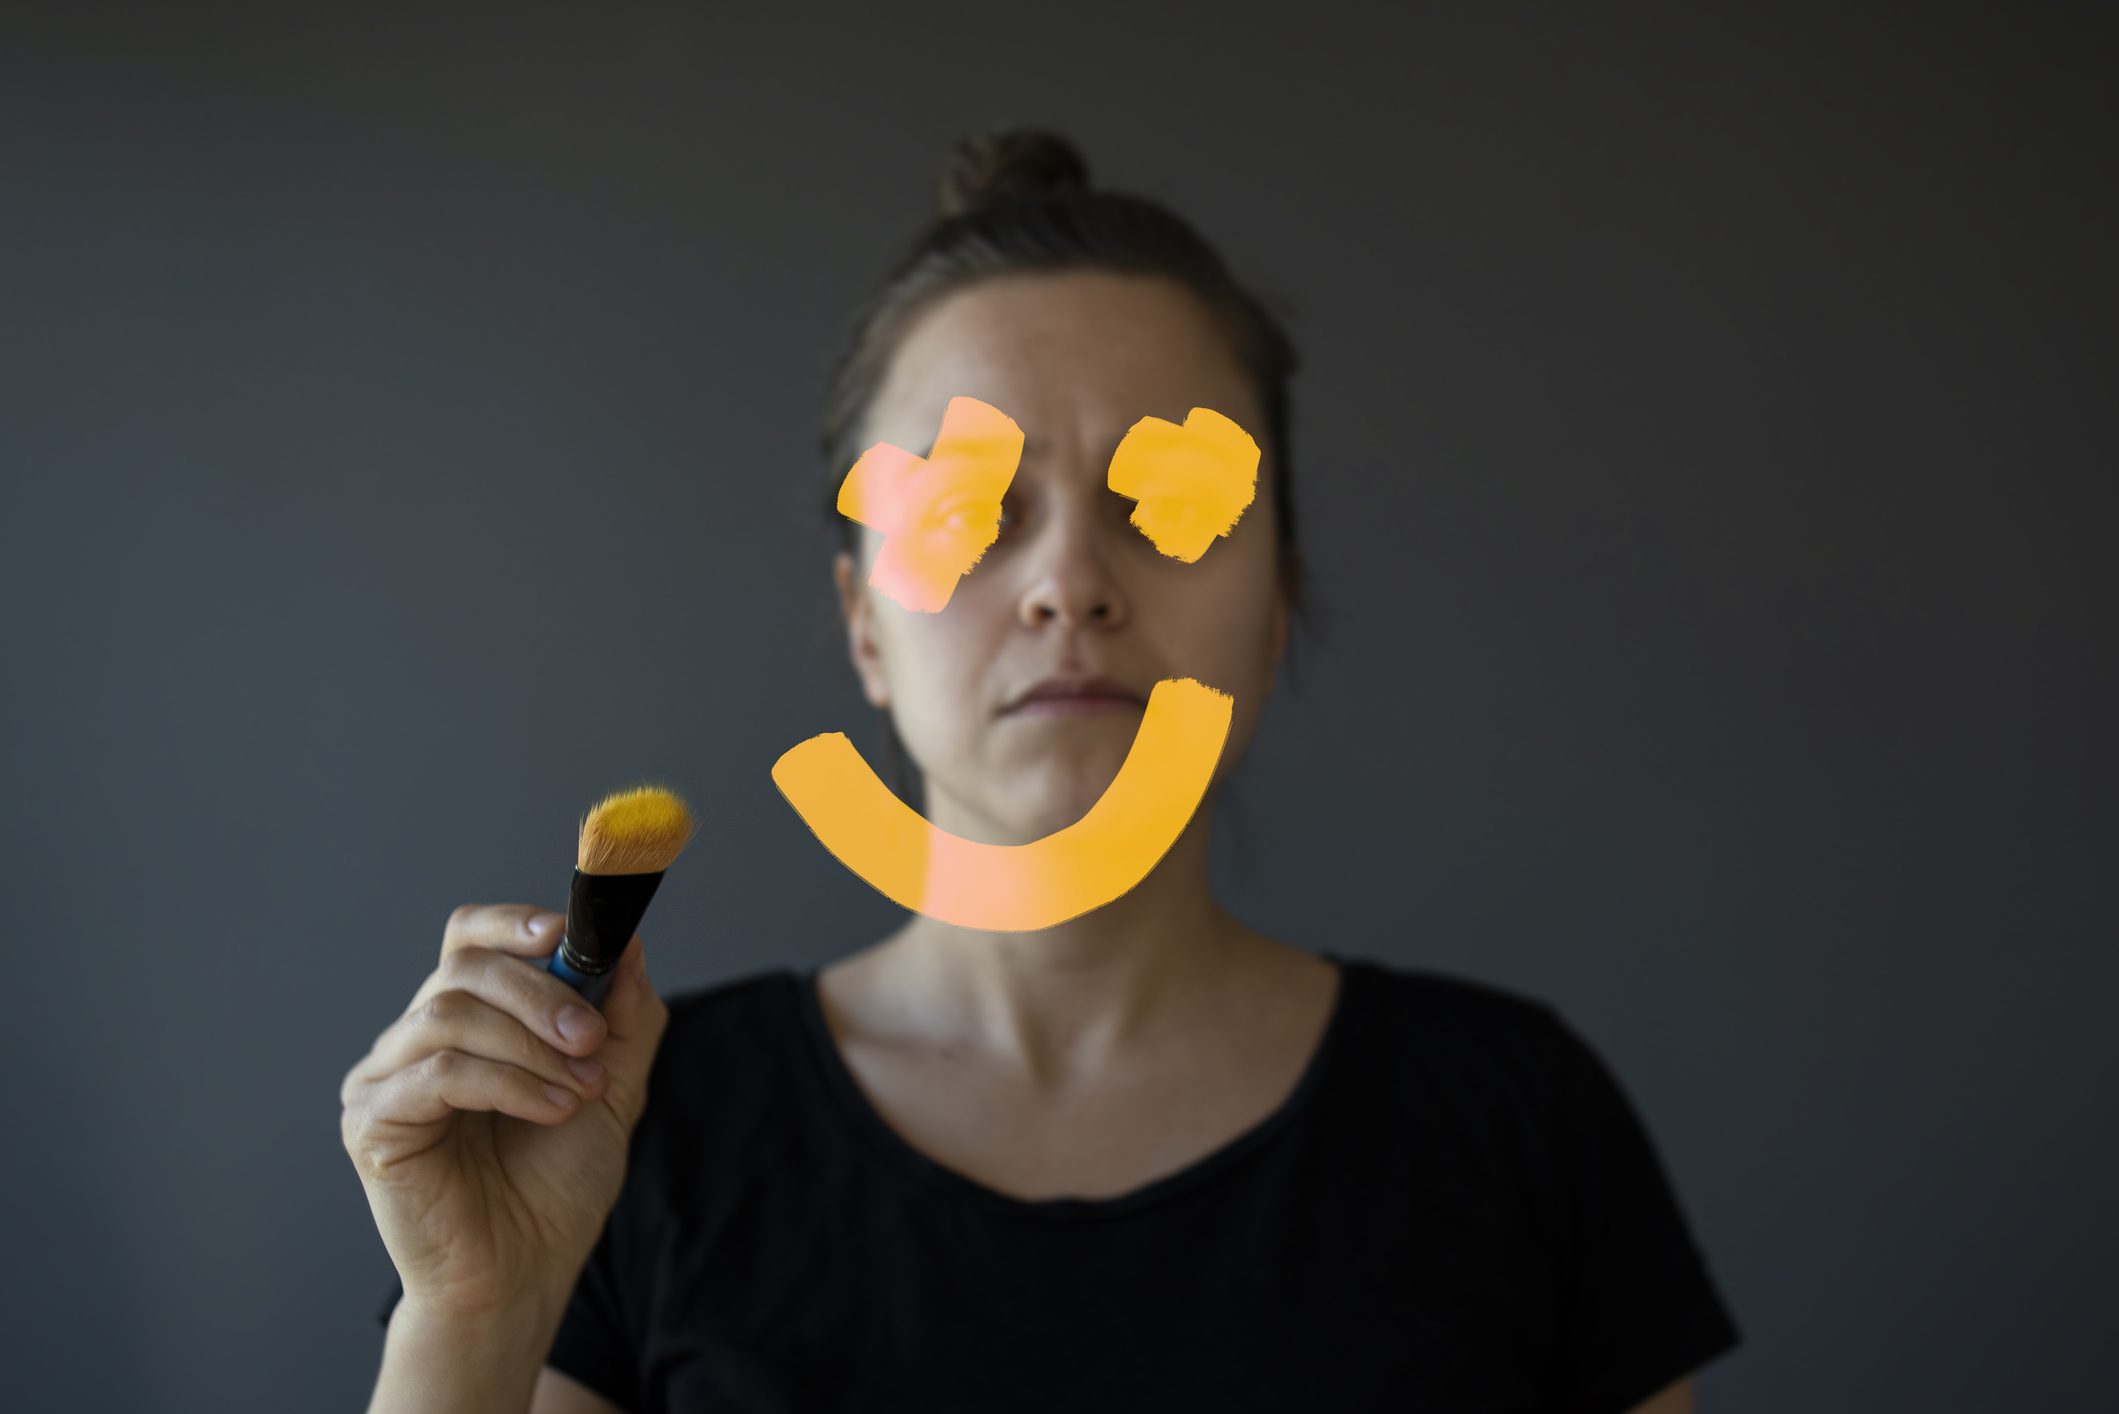 Photo of a woman drawing on a smile to represent phrases that promote toxic positivity